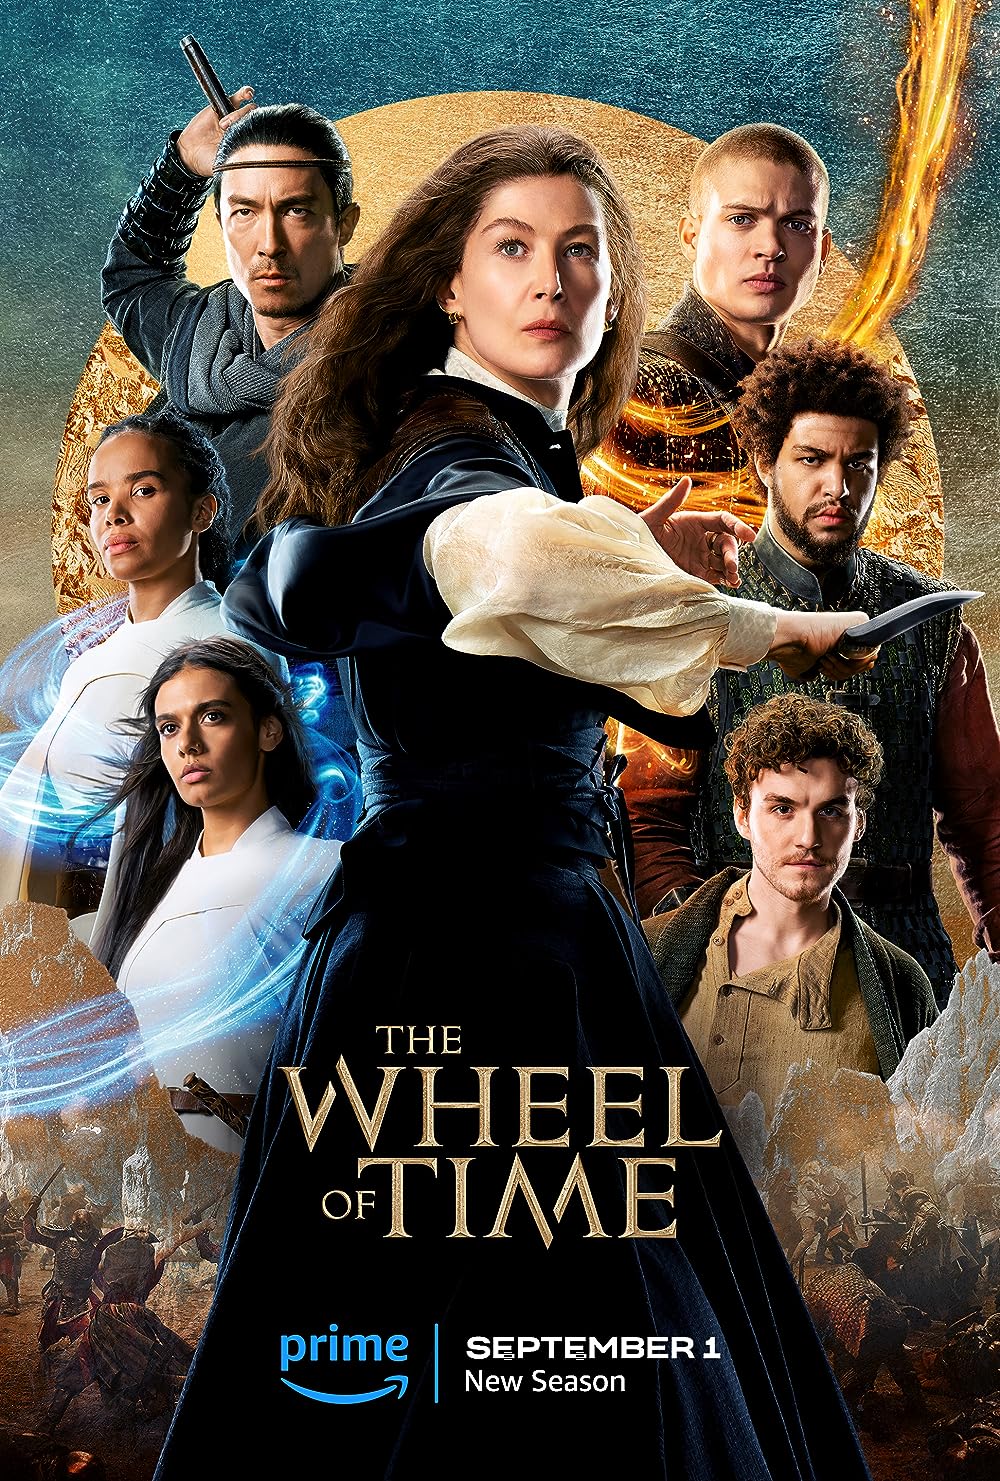 Download The Wheel Of Time (Season 2) (E08 ADDED) Dual Audio {Hindi-English} Prime Series 1080p | 720p | 480p WEB-DL download